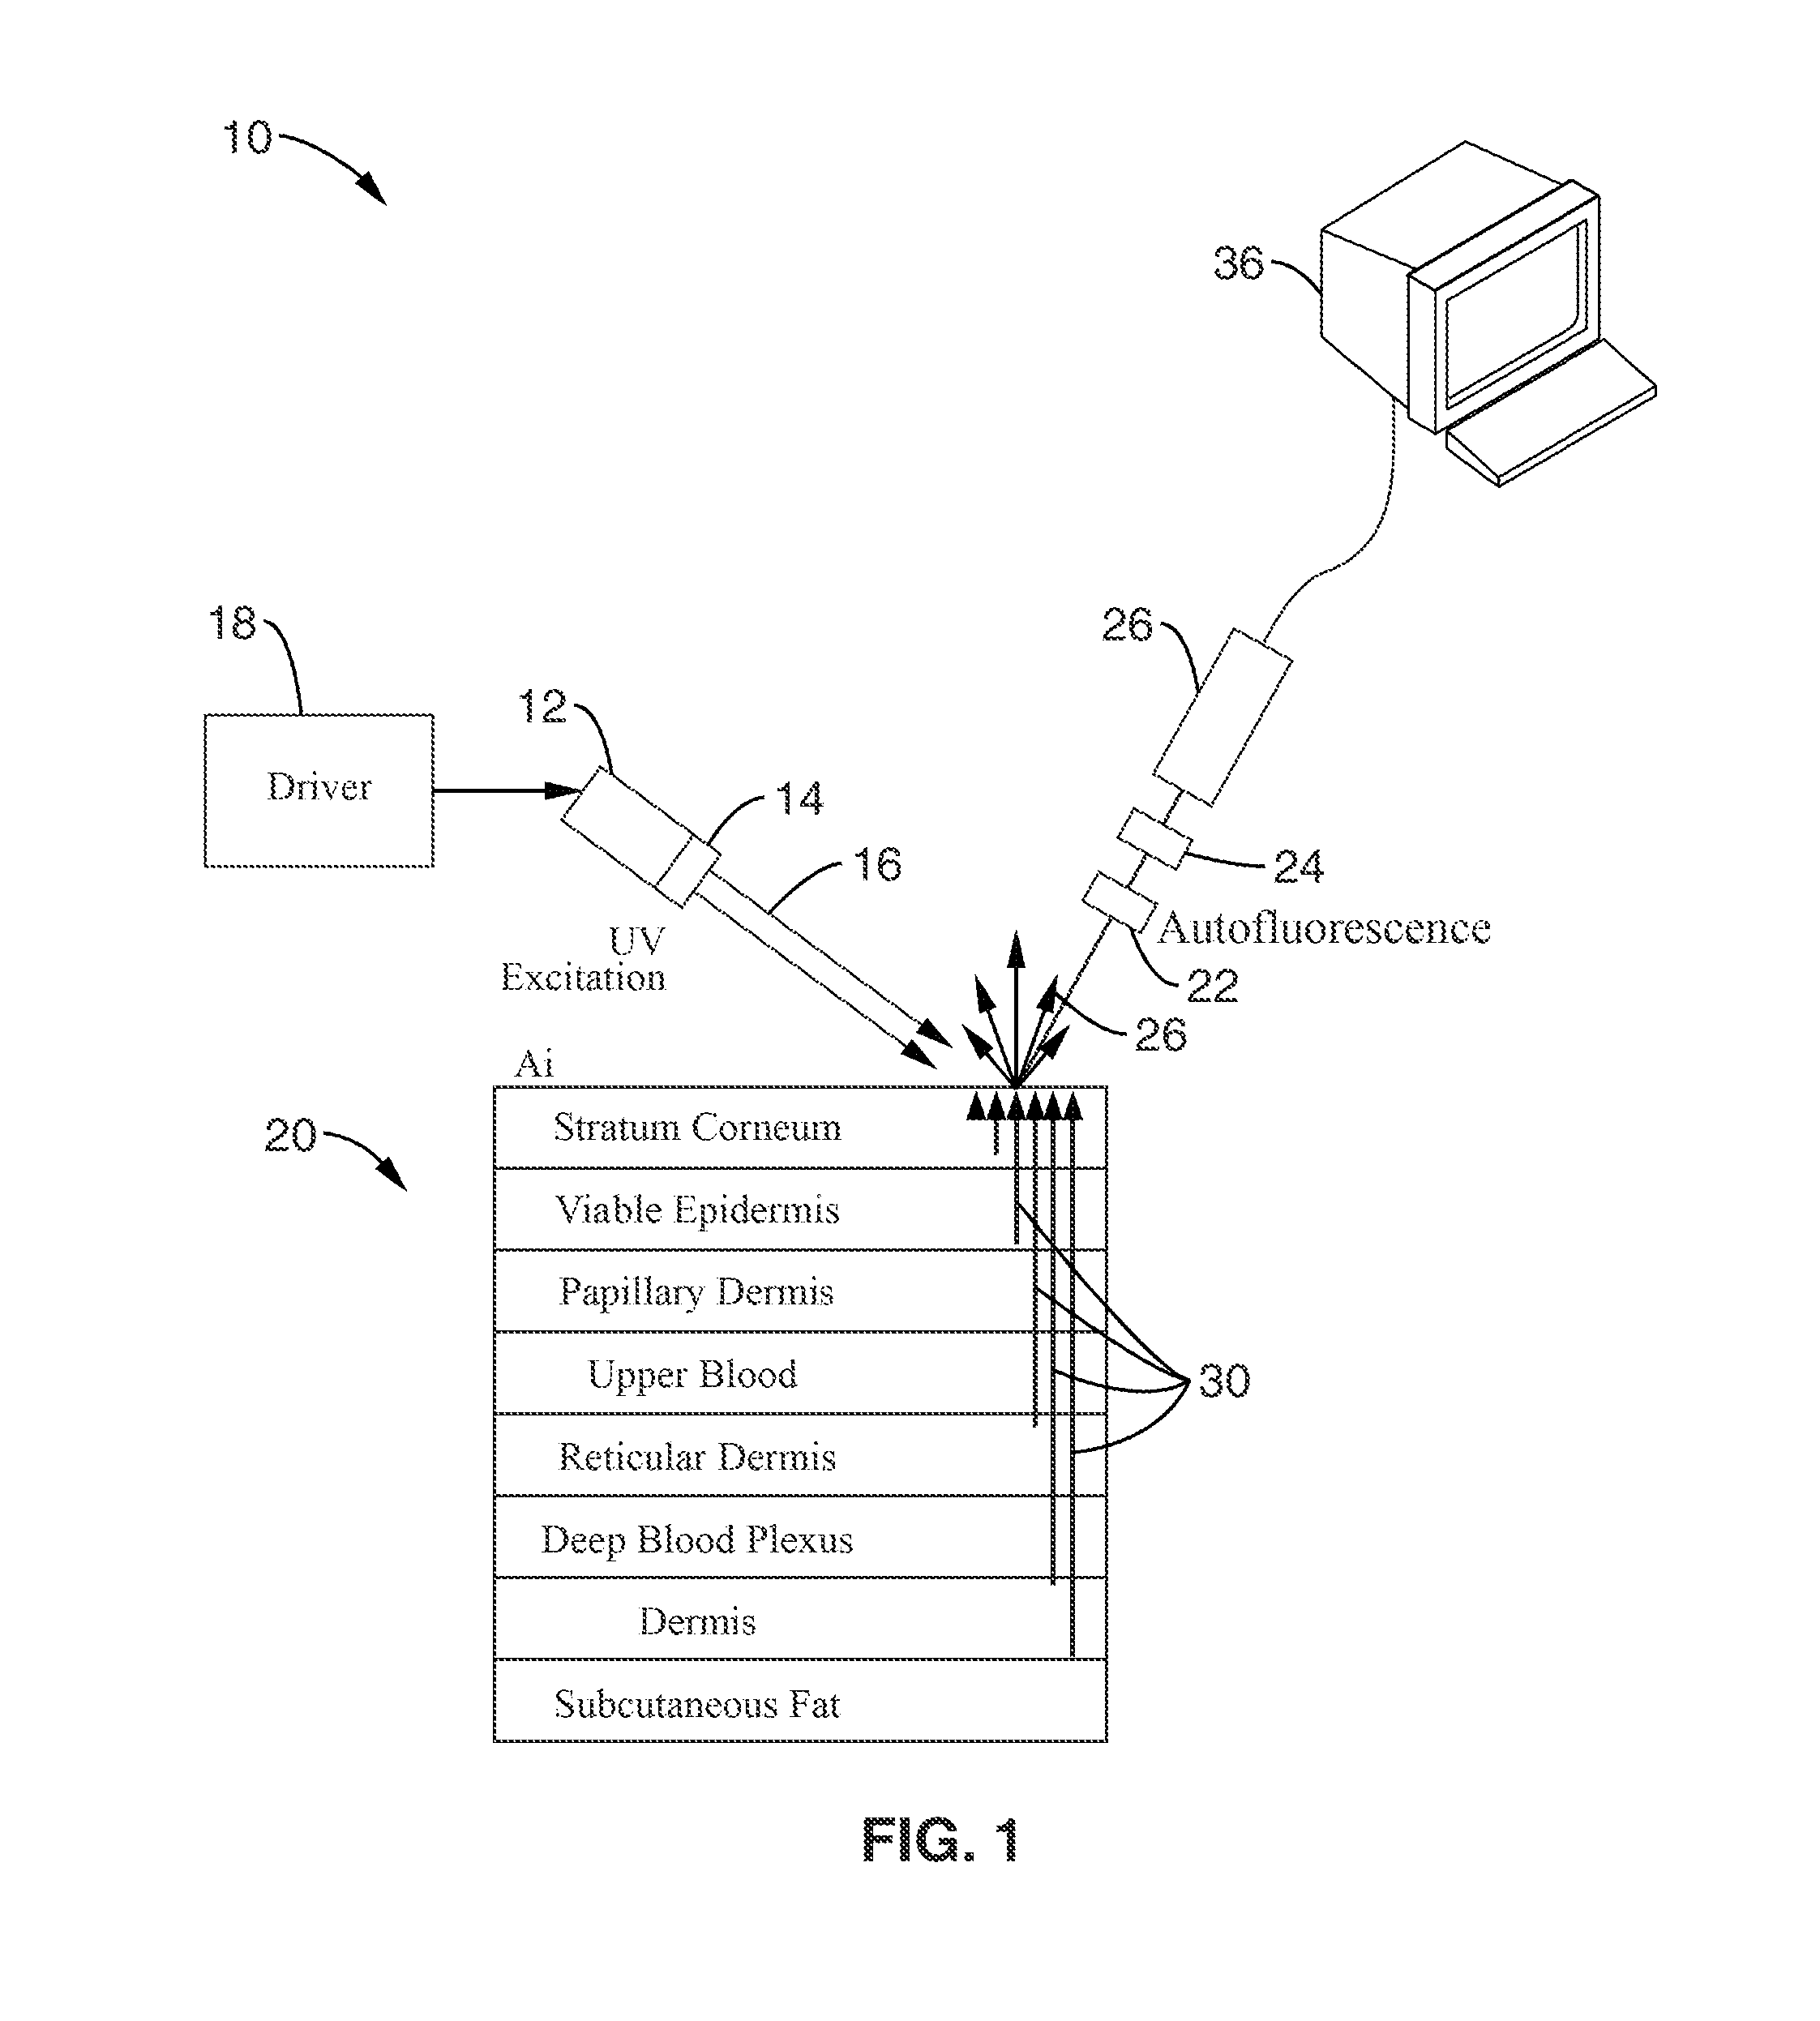 Time-resolved non-invasive optometric device for medical diagnostic